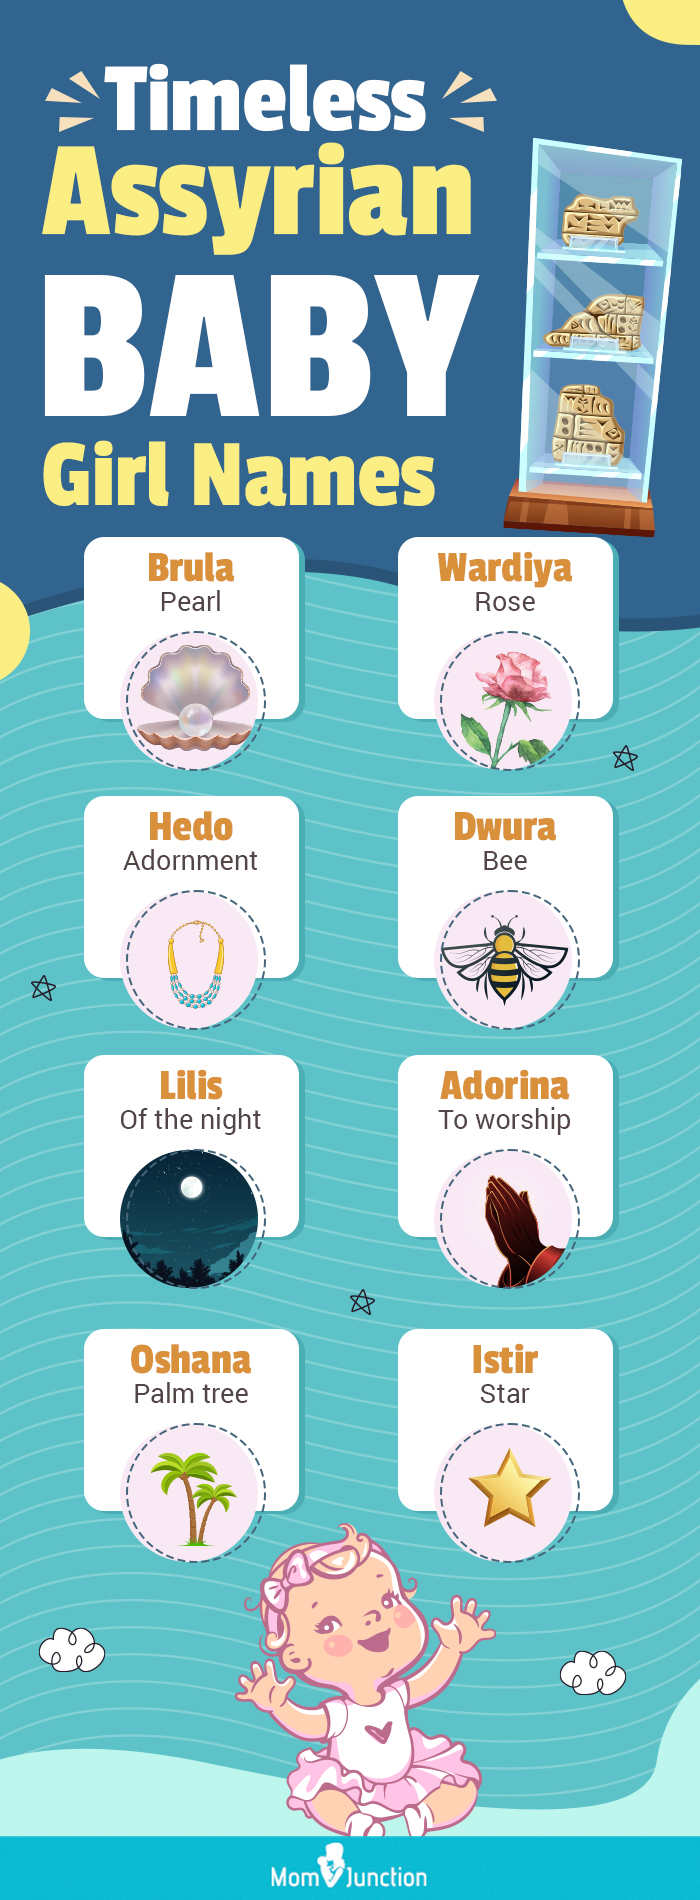 timeless assyrian baby girl names (infographic)